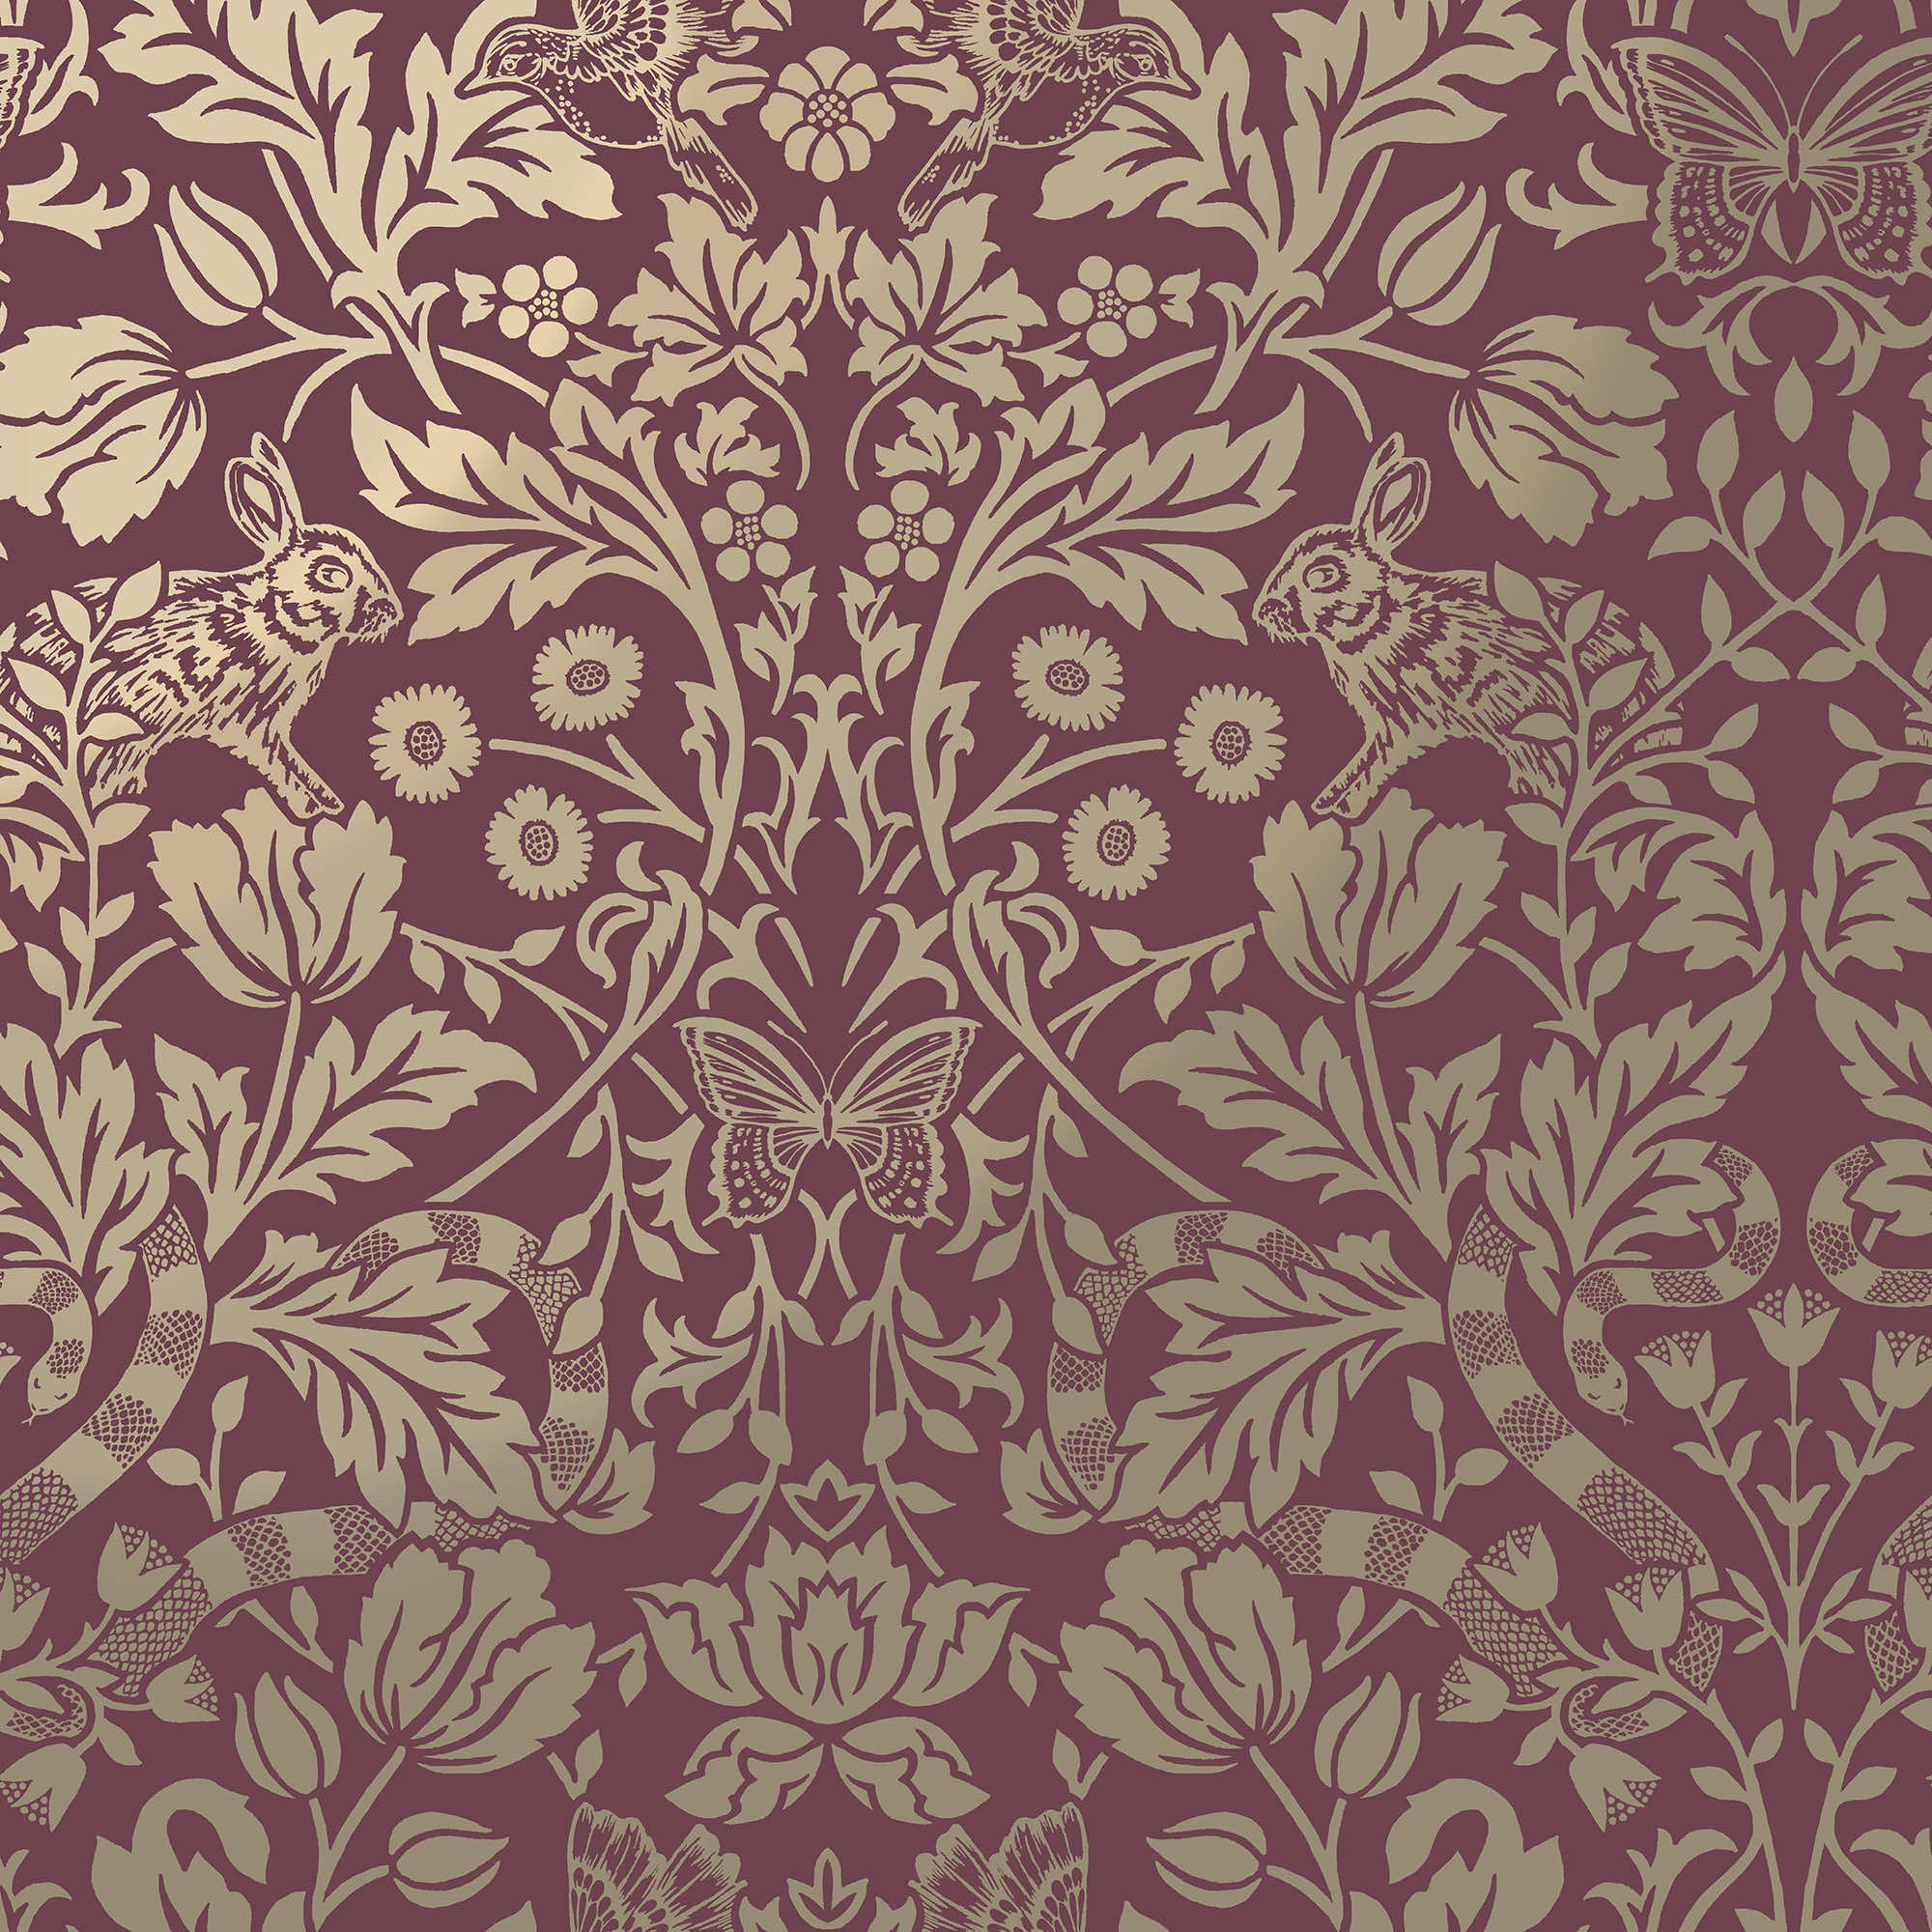 Image of Holden Decor Metallic Mirrored Floral Red Wallpaper - 10.05m x 53cm